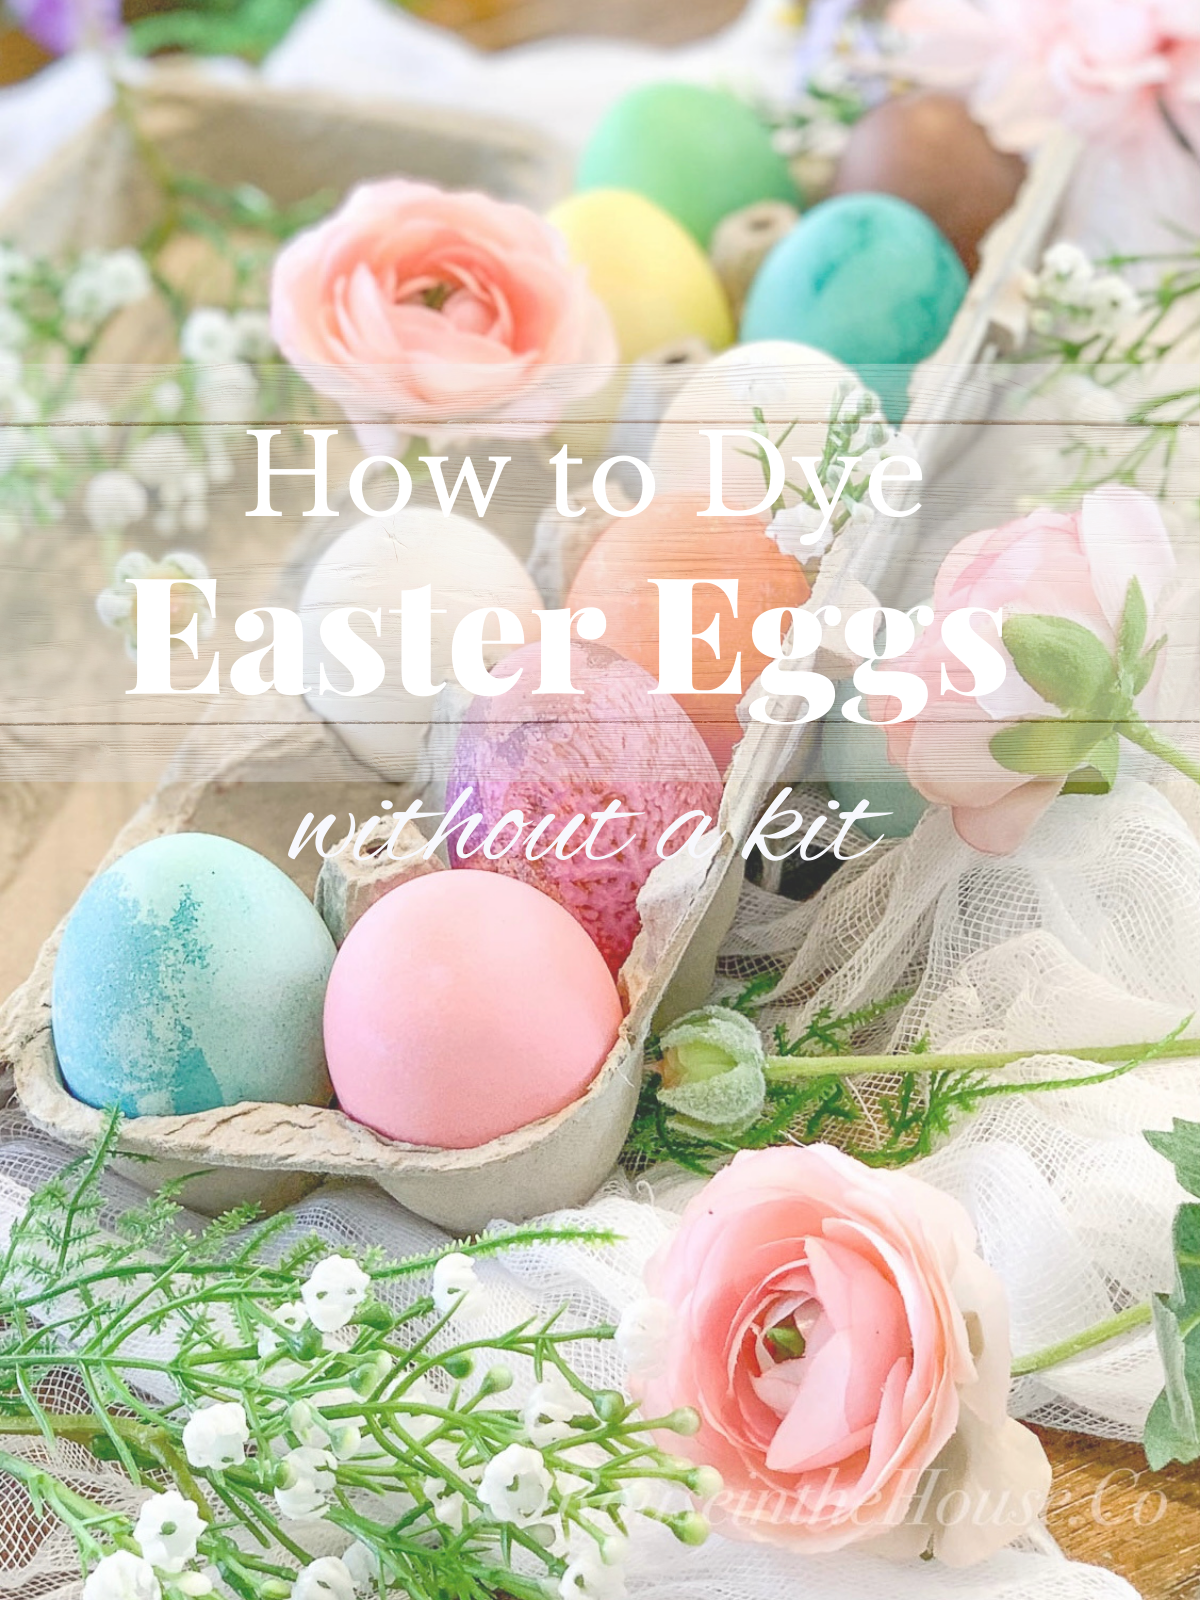 Dyed Eggs in a Crate with Flowers